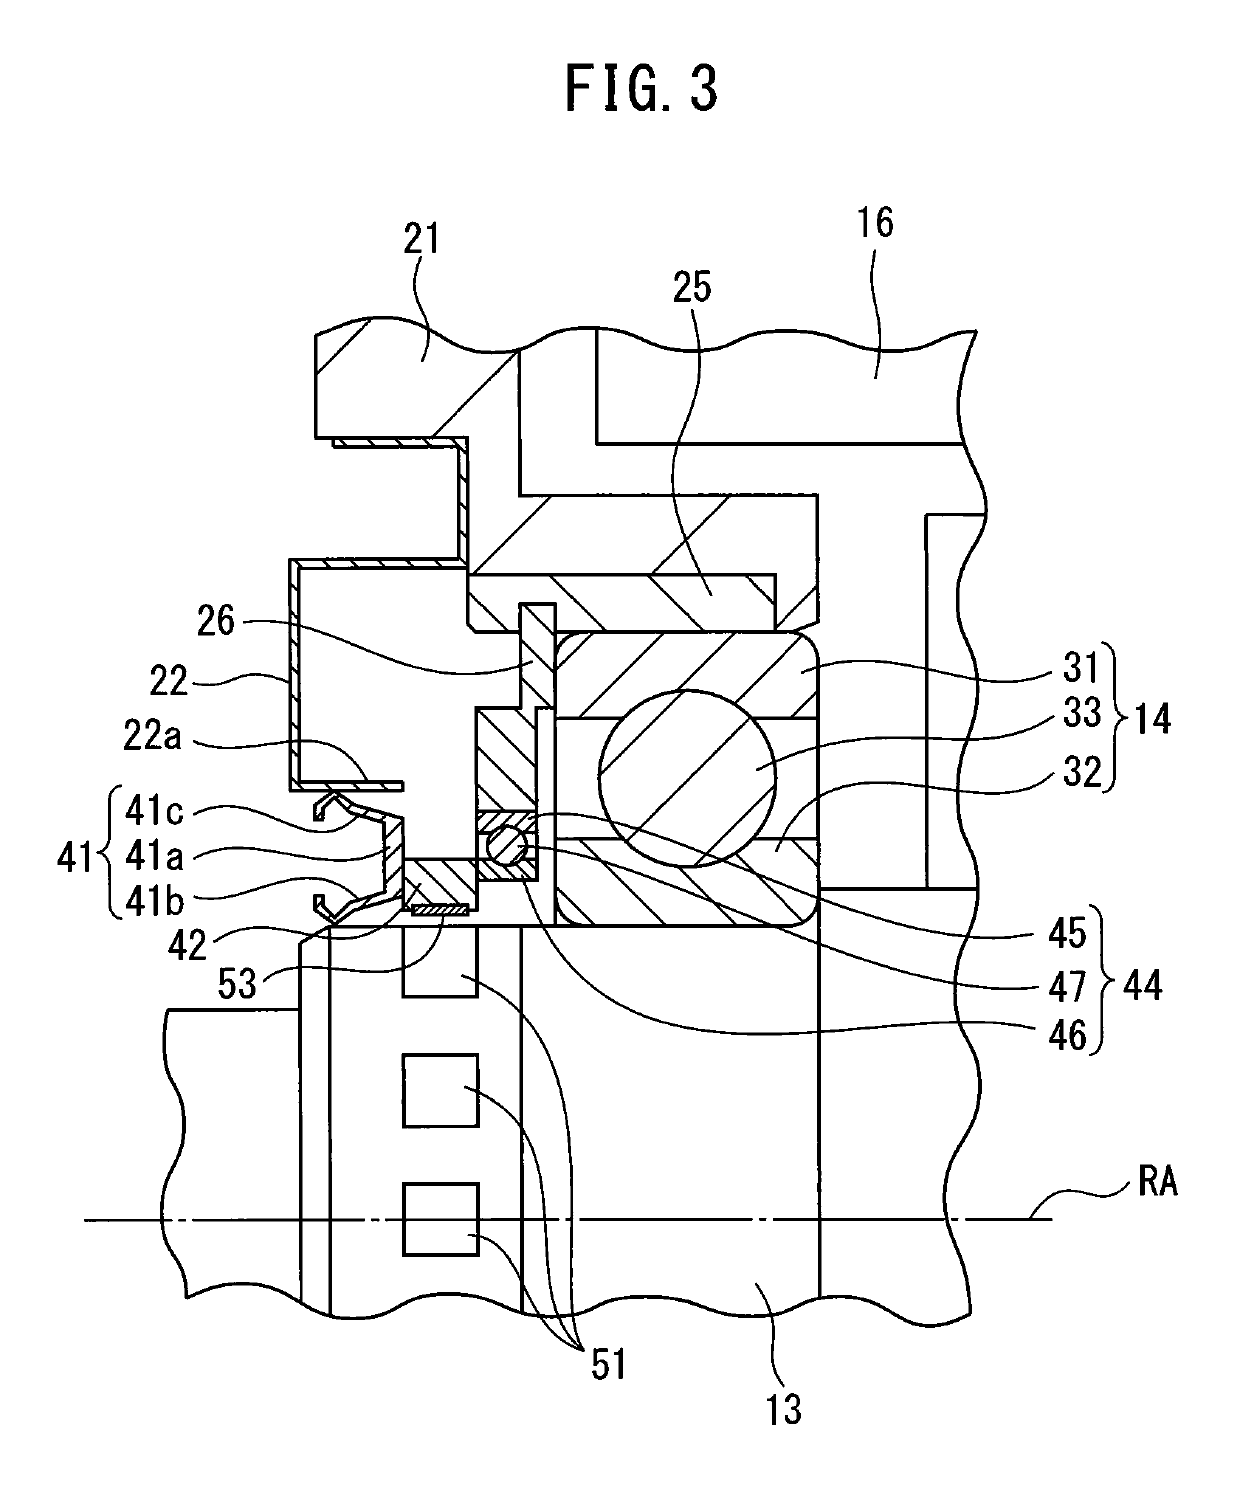 Motor for suppressing entry of foreign matter